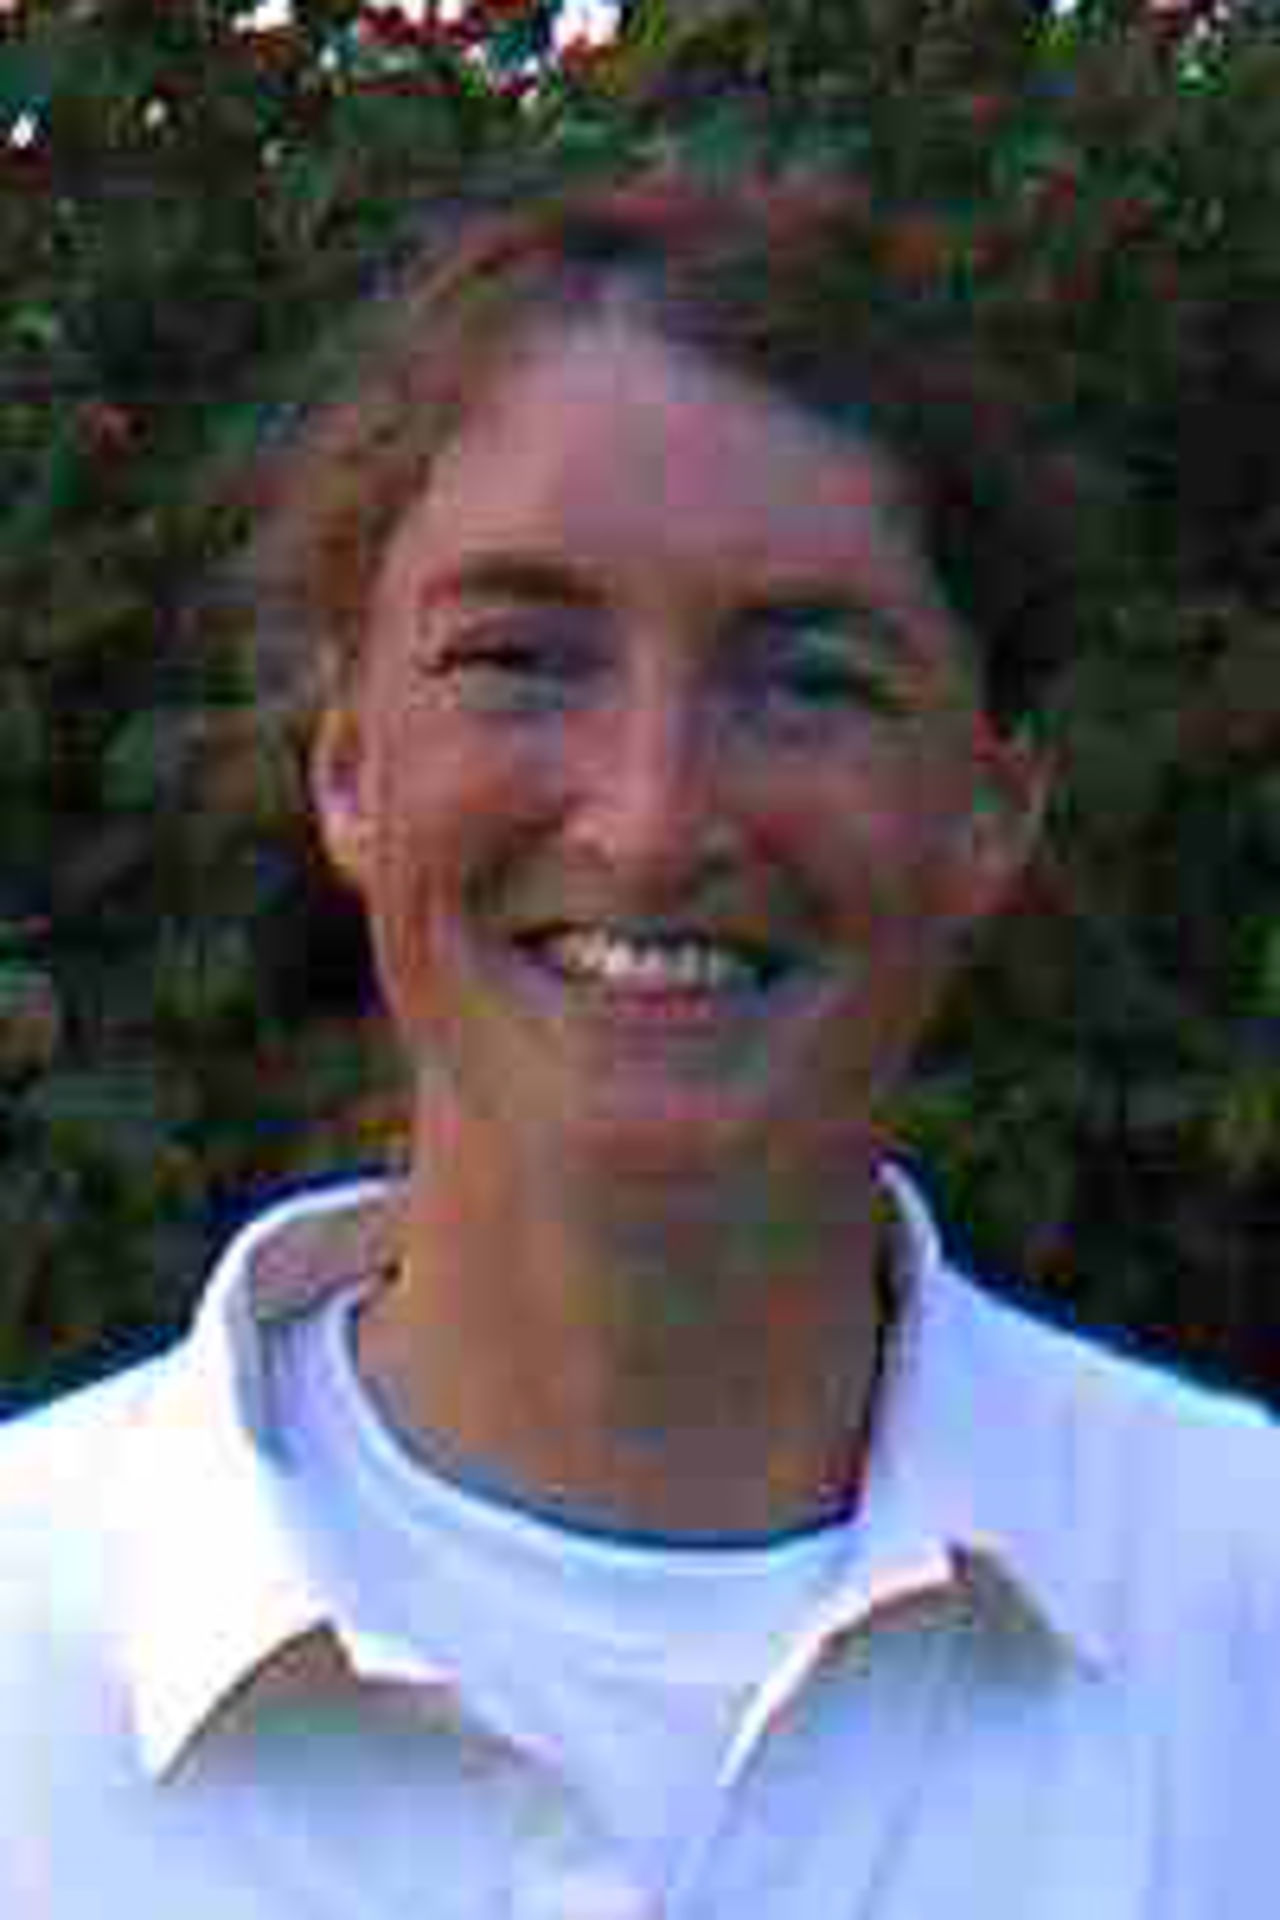 Portrait of Elise Reynolds, August 2000 - Netherlands player in the CricInfo Women's World Cup 2000